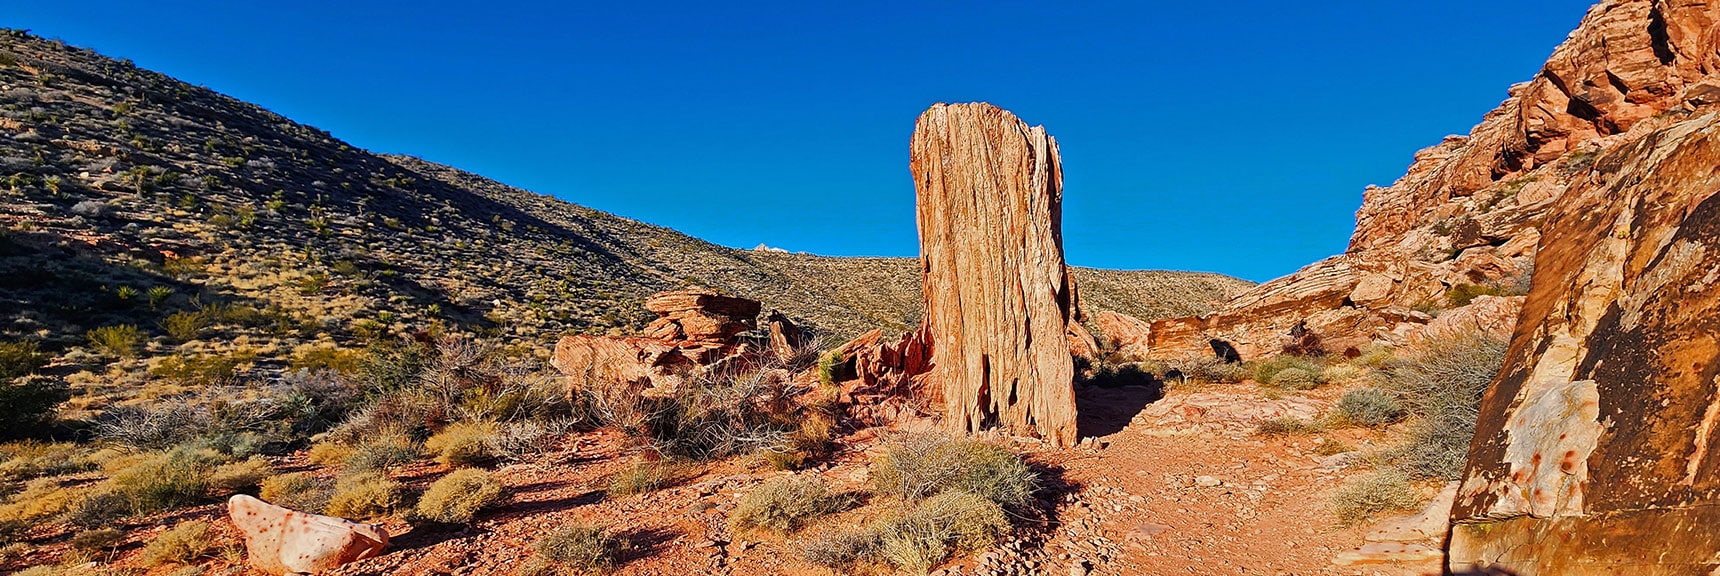 I Call This the Tree Trunk Pinnacle. Ascend Ridge to Left on Lower Calico Hills Trail. | 3 Basin Circuit | Calico Basin, Brownstone Basin, Red Rock Canyon, Nevada